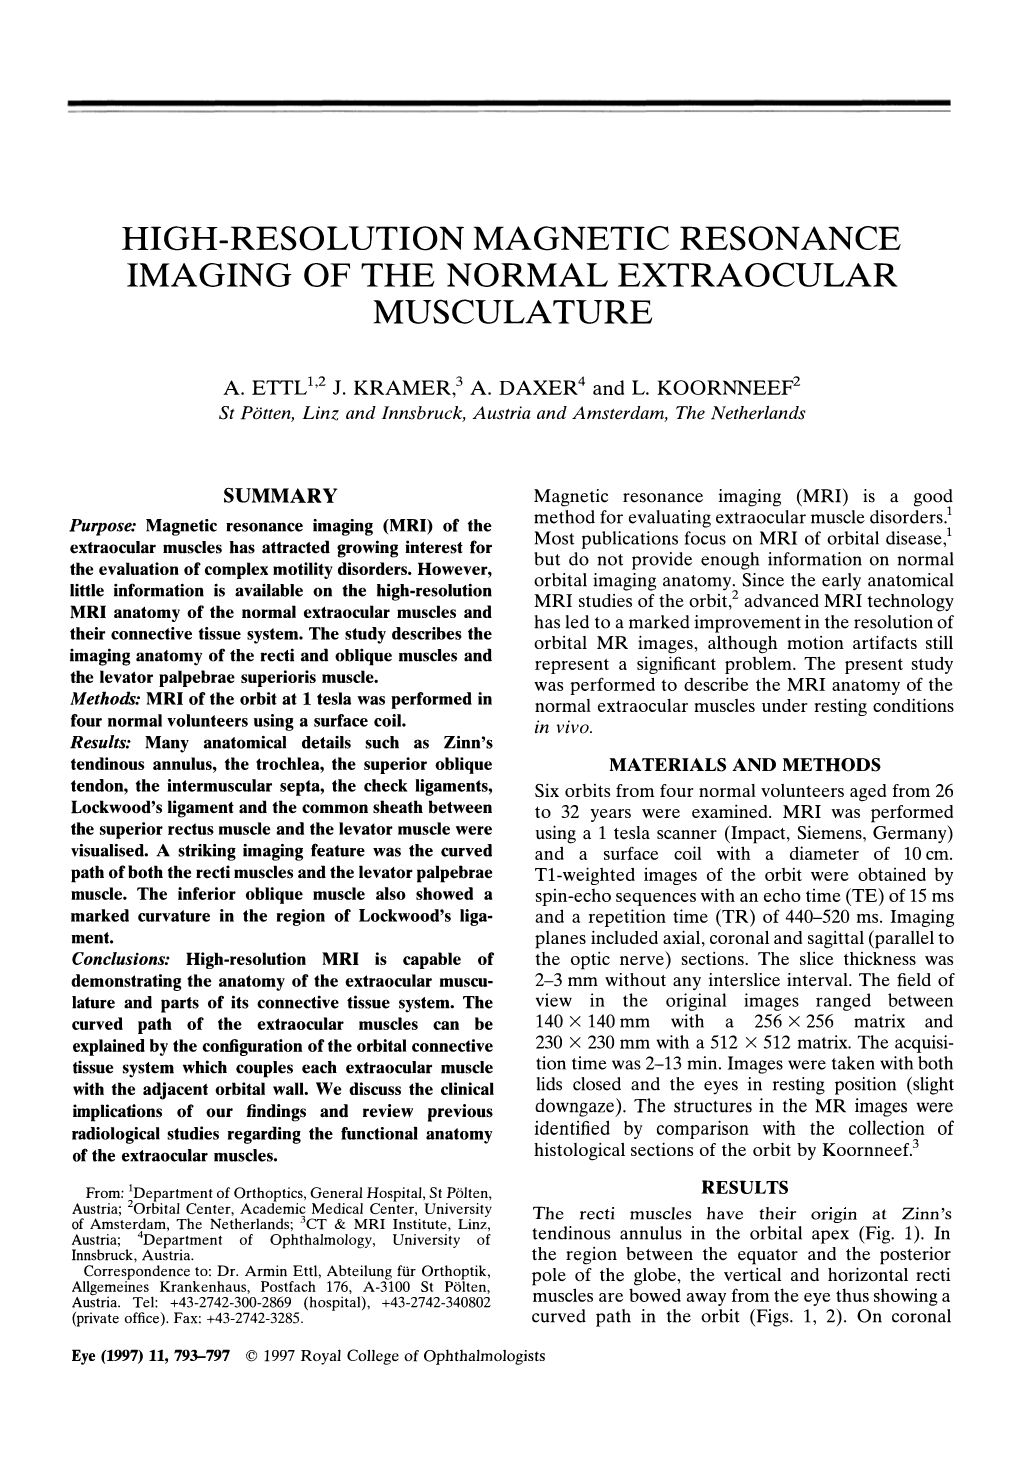 High-Resolution Magnetic Resonance Imaging of the Normal Extraocular Musculature